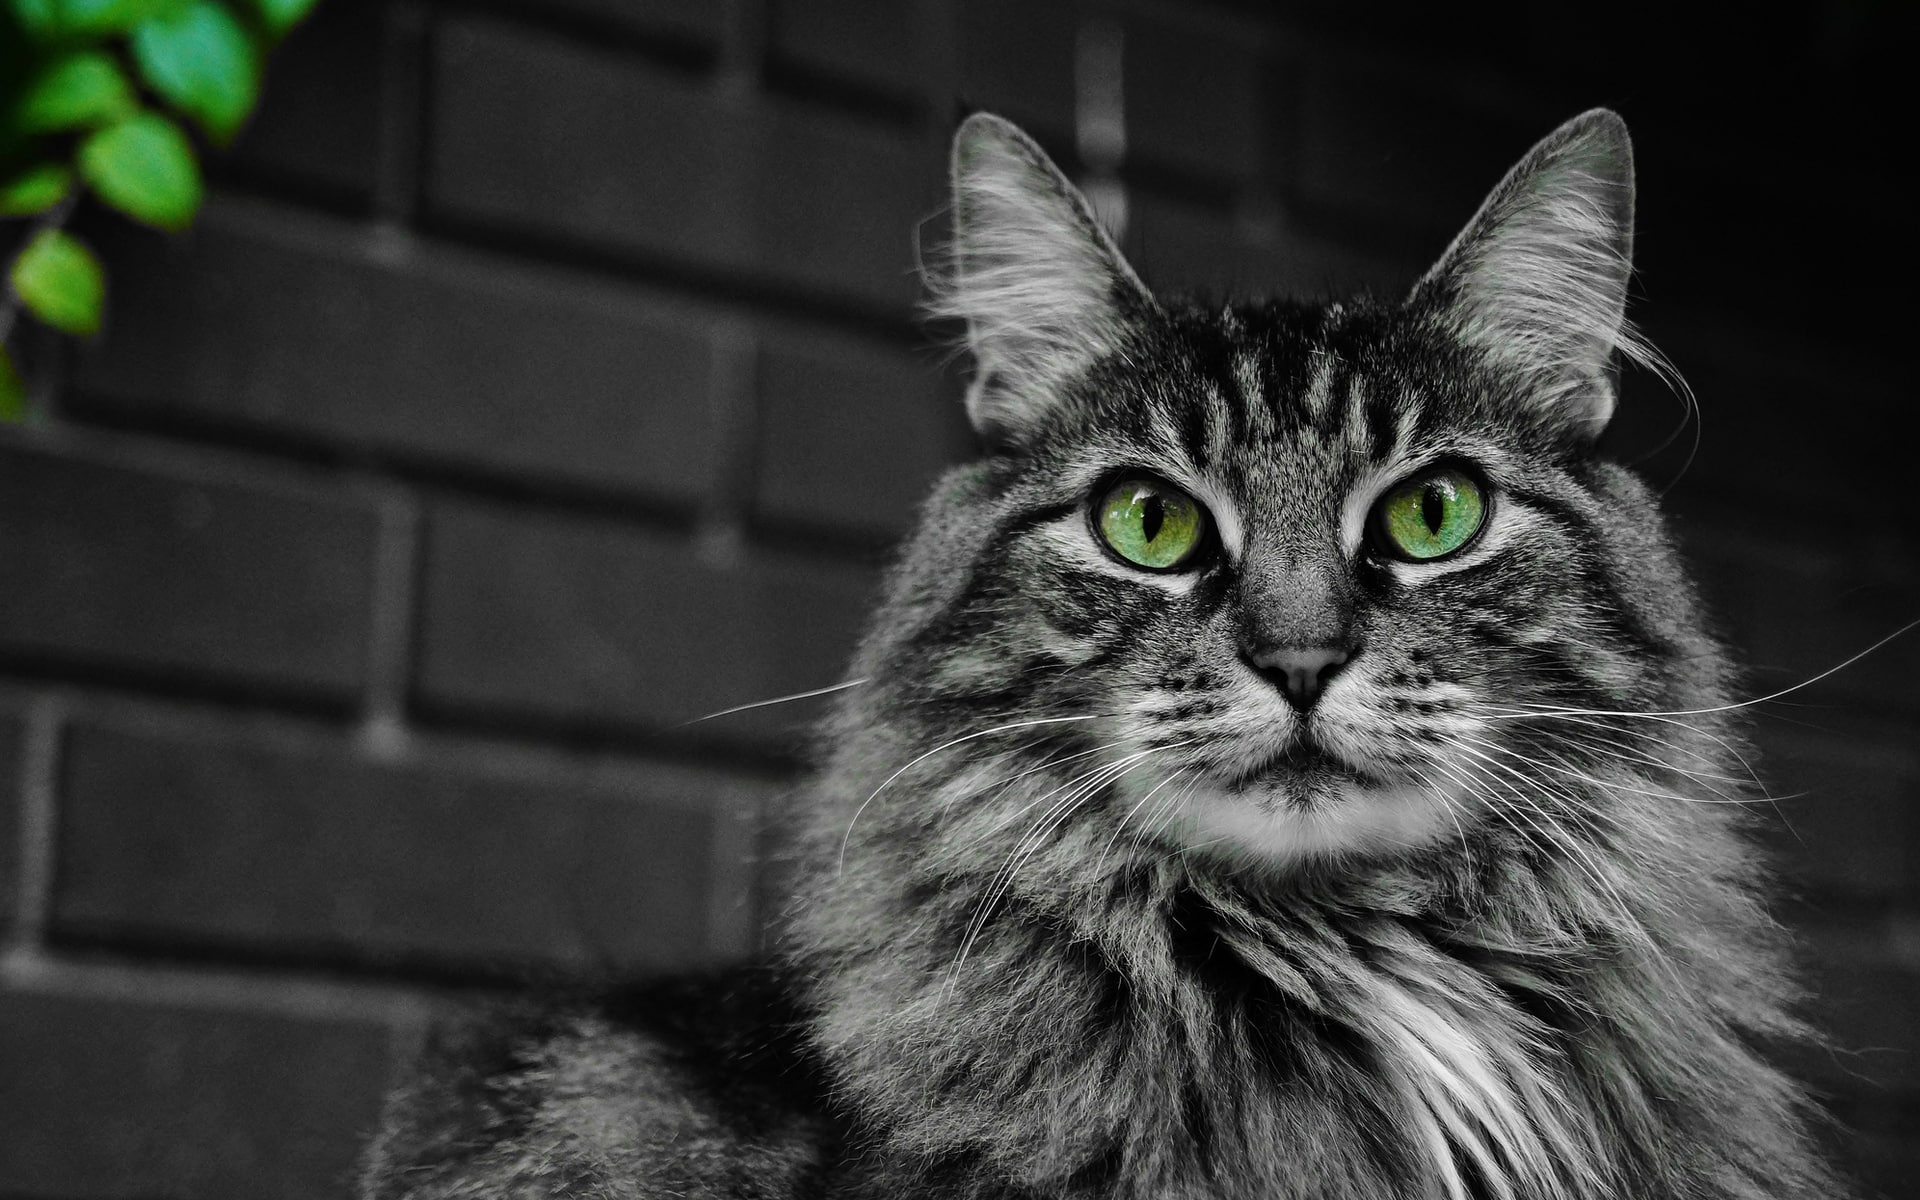 Fluffy Cat with Green Eyes, gray maine coon cat